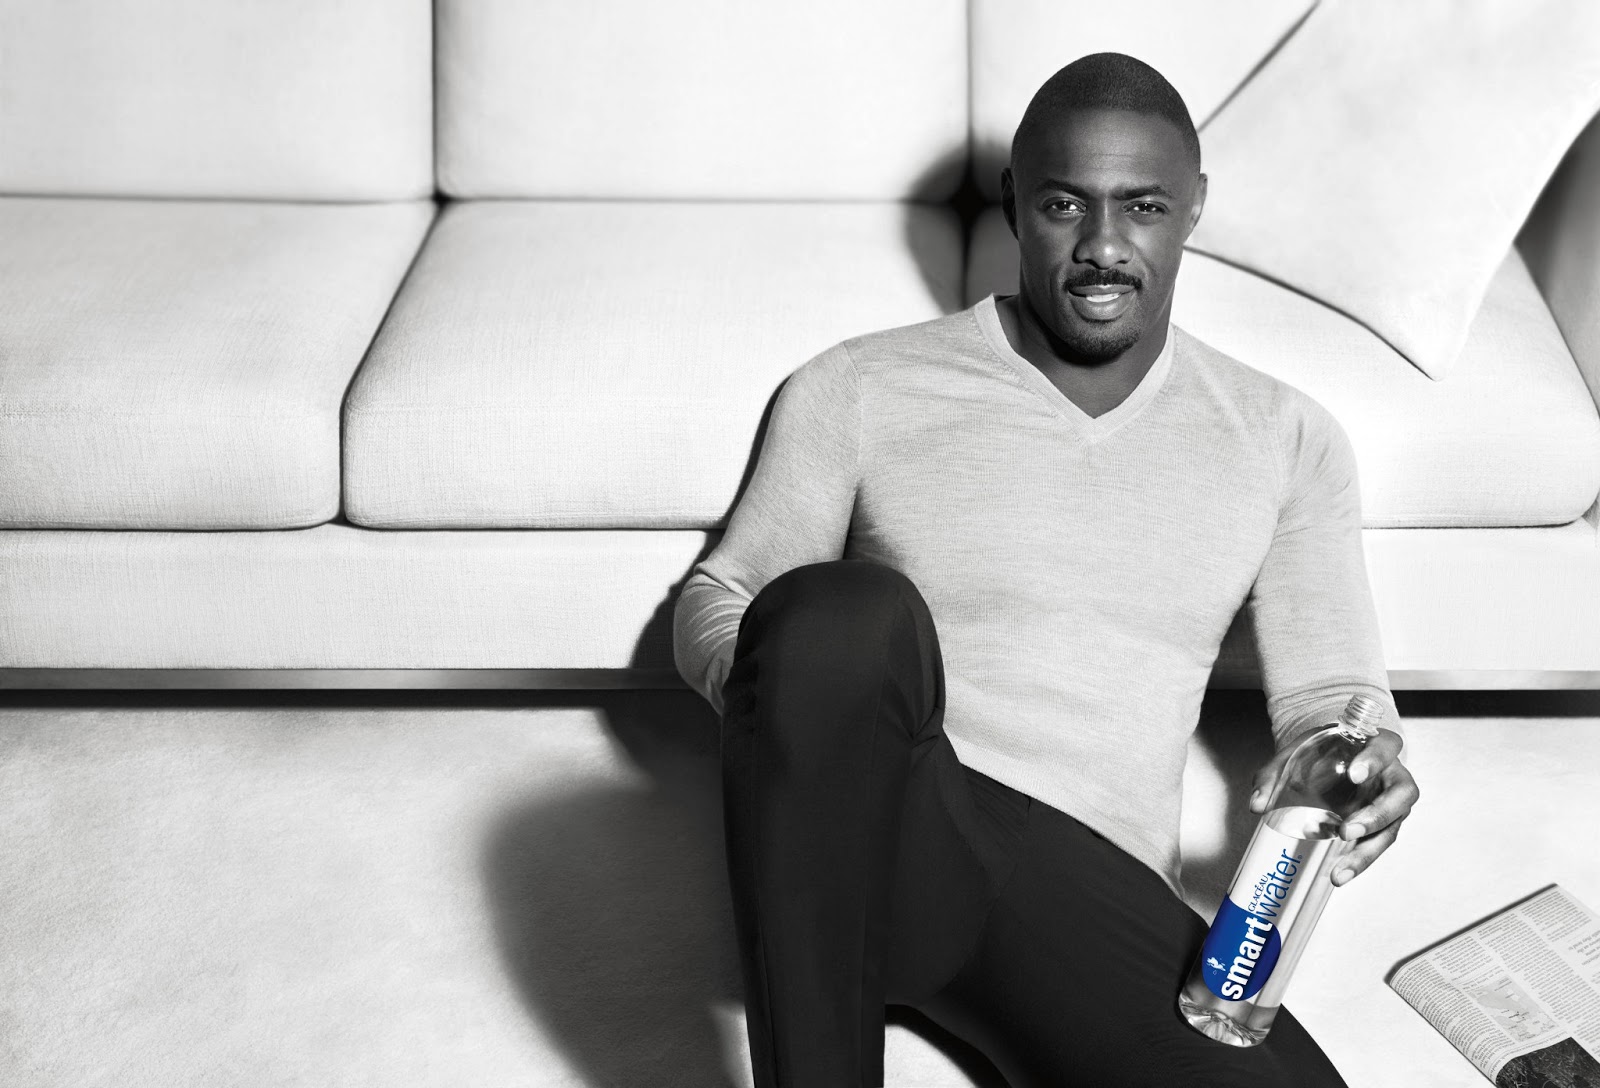 Idris-Elba-Lounging-Ad-for-smartwater-CAPTION-MUST-INCLUDE-smartwater1.jpg